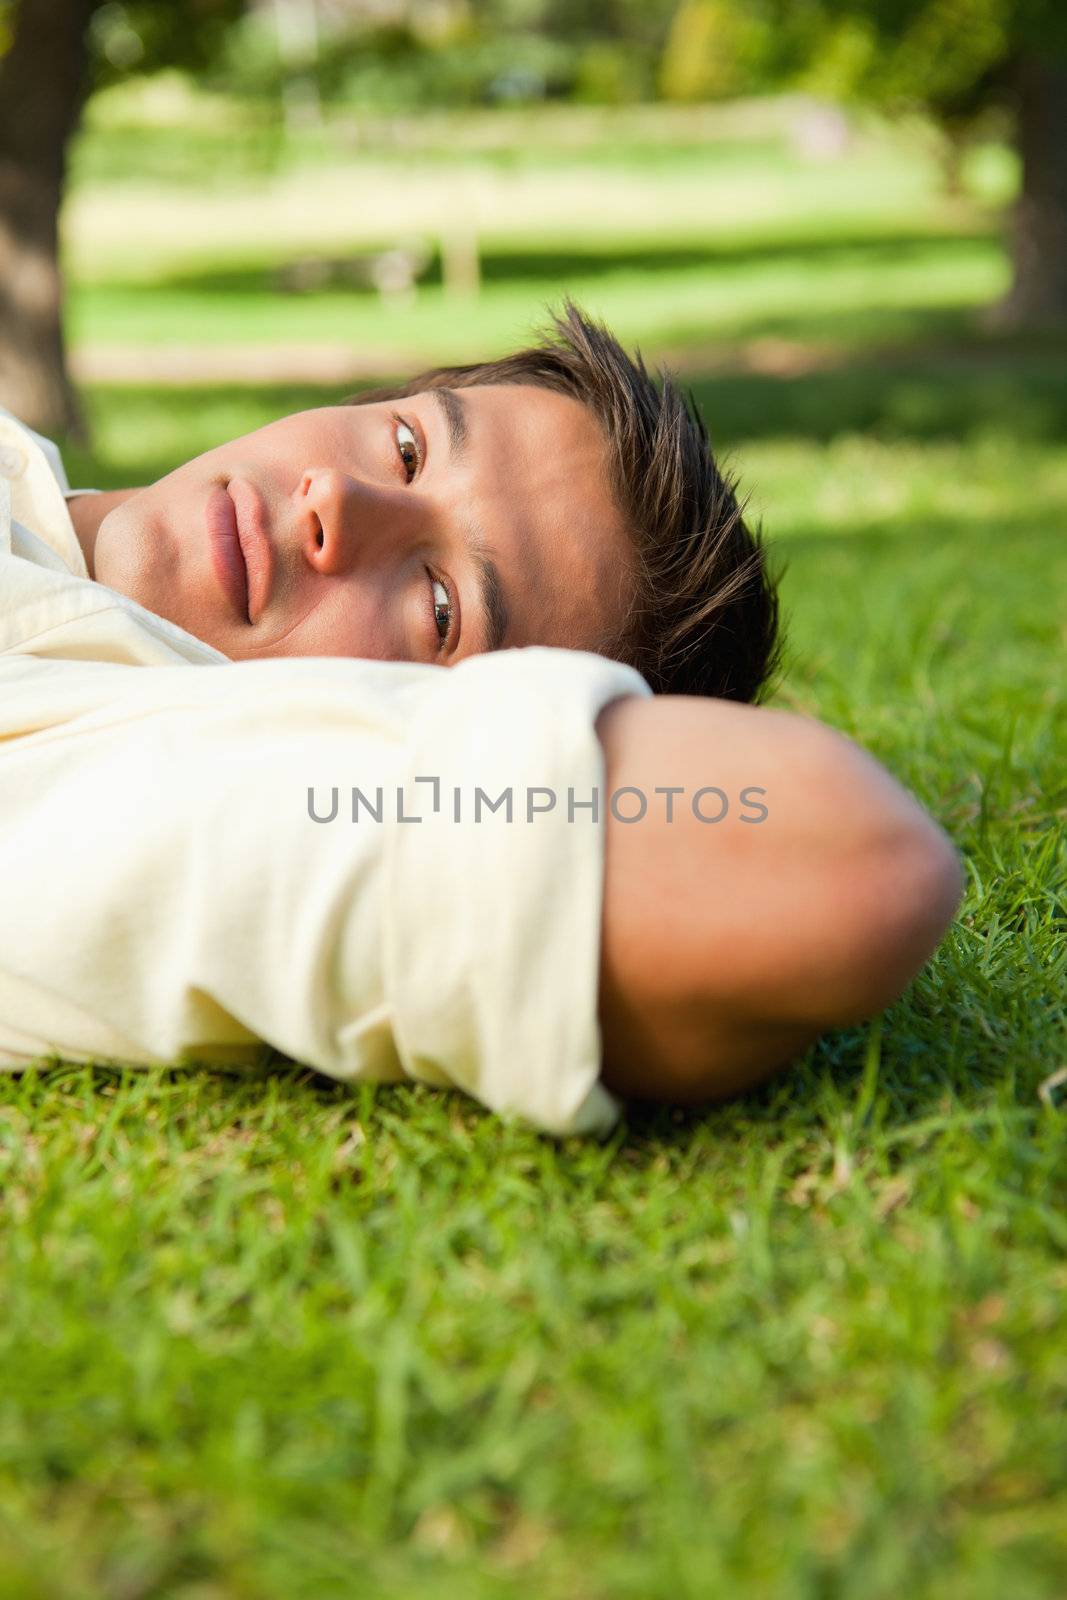 Man with serious expression lying in grass with his hands resting underneath the side of his head